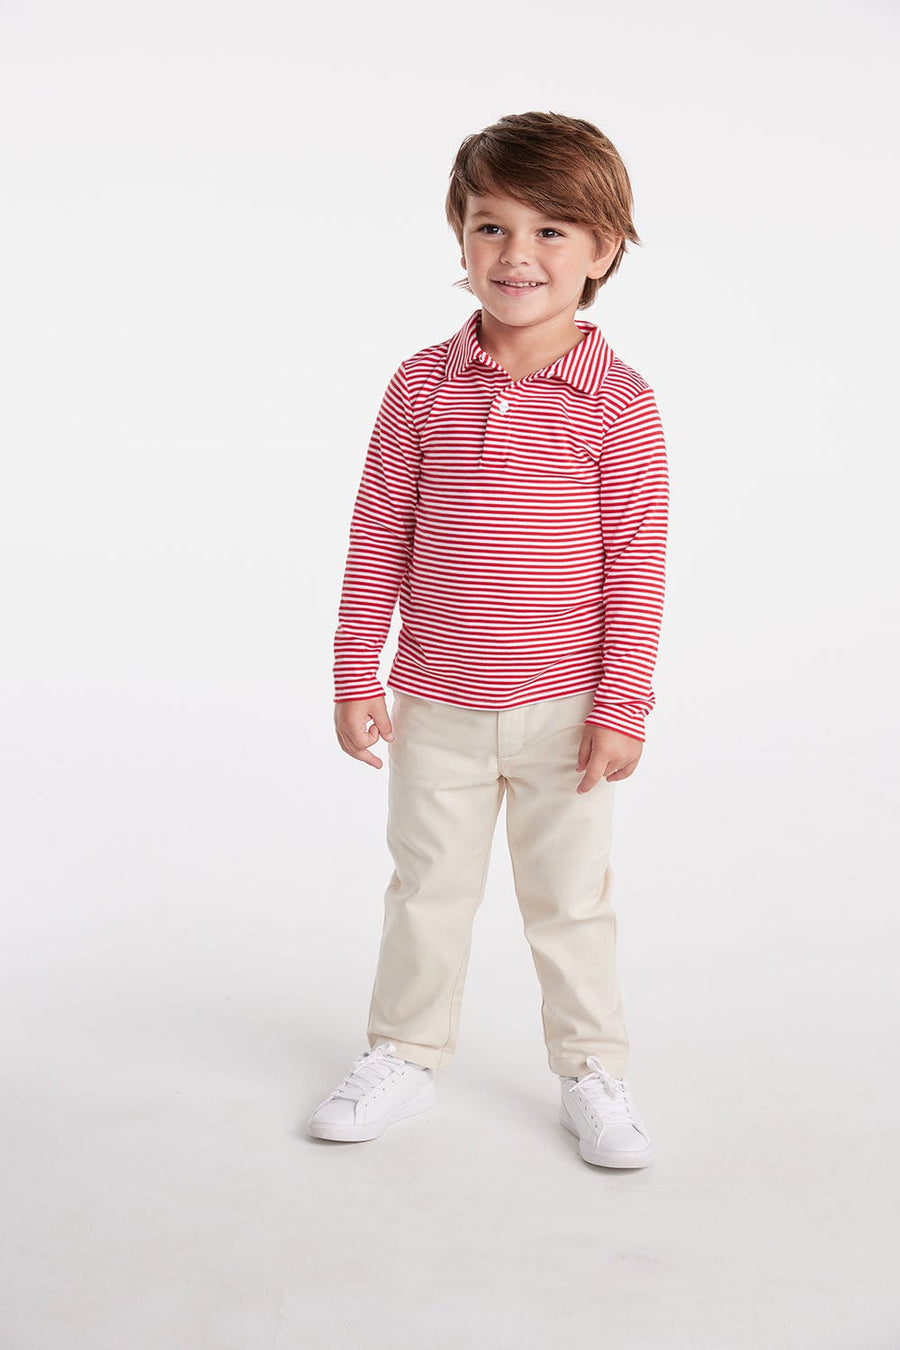 classic childrens clothing boys long sleeve polo in red and white stripe